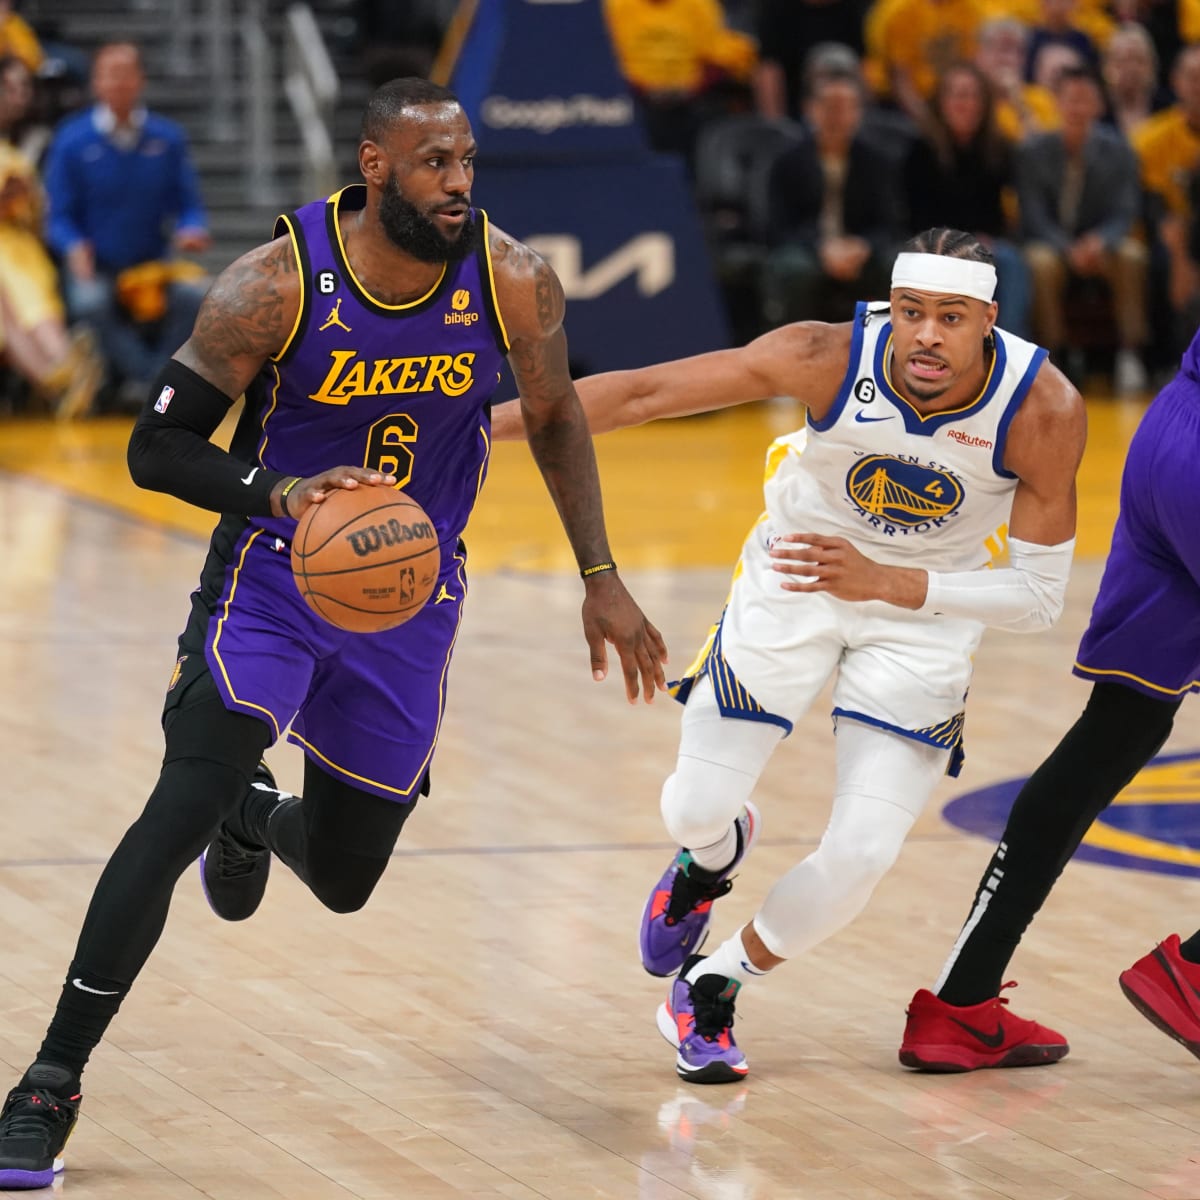 Golden State Warriors 101 vs 104 Los Angeles Lakers summary: stats